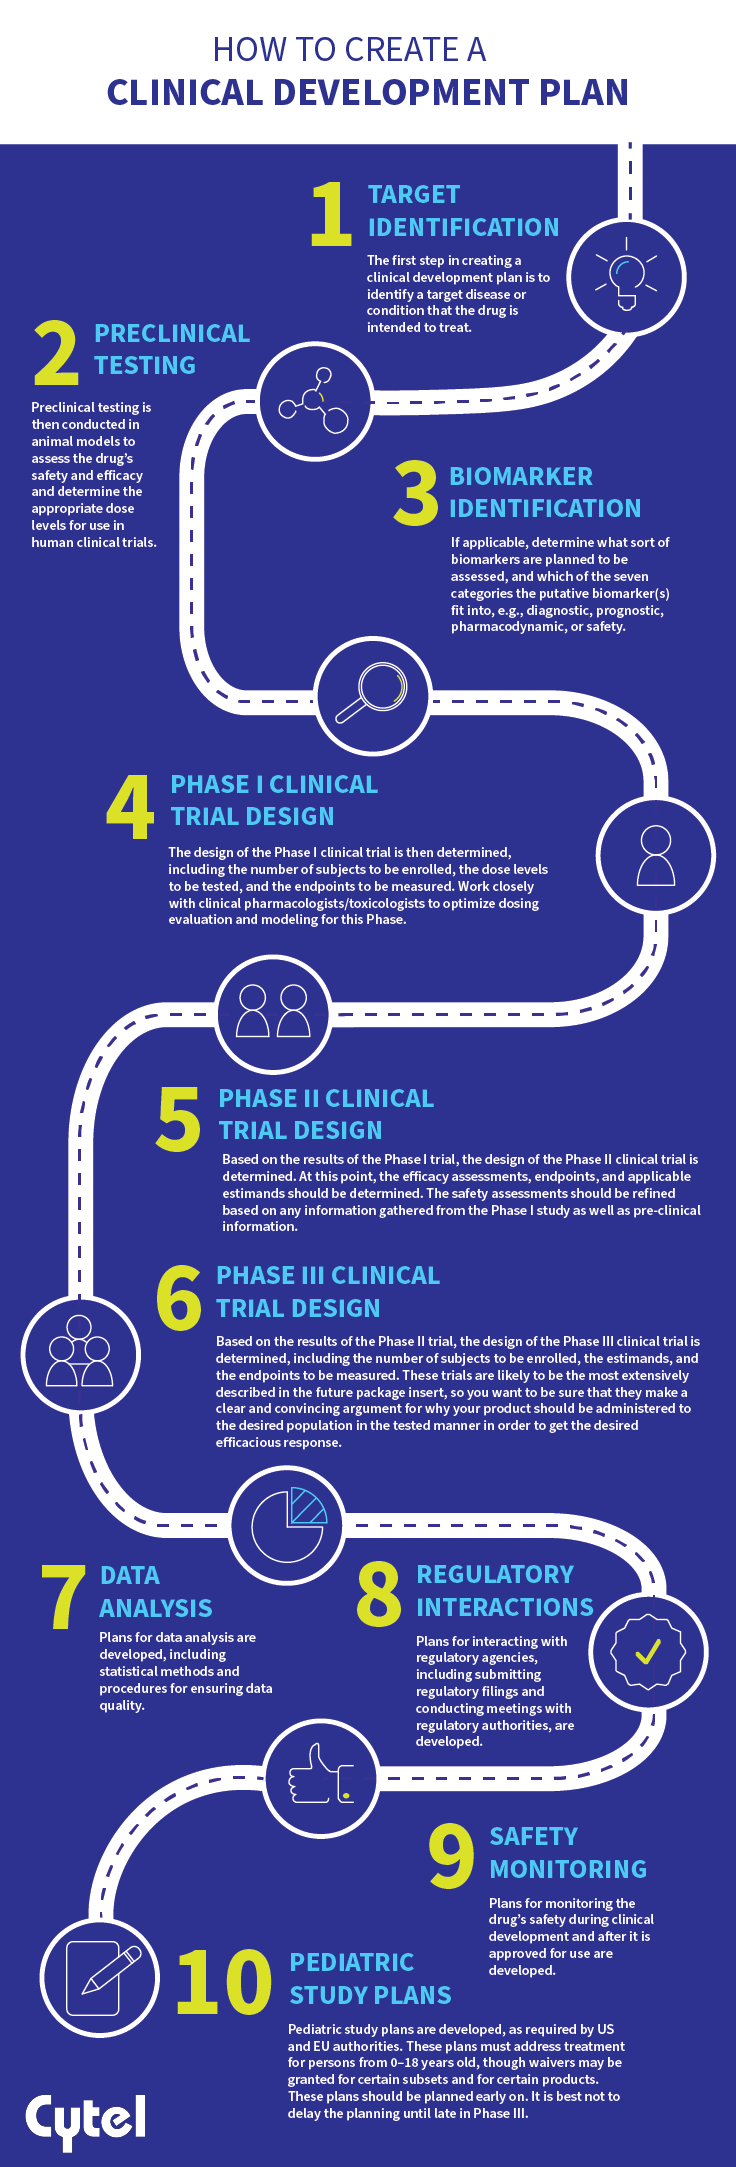 How to create a clinical development plan